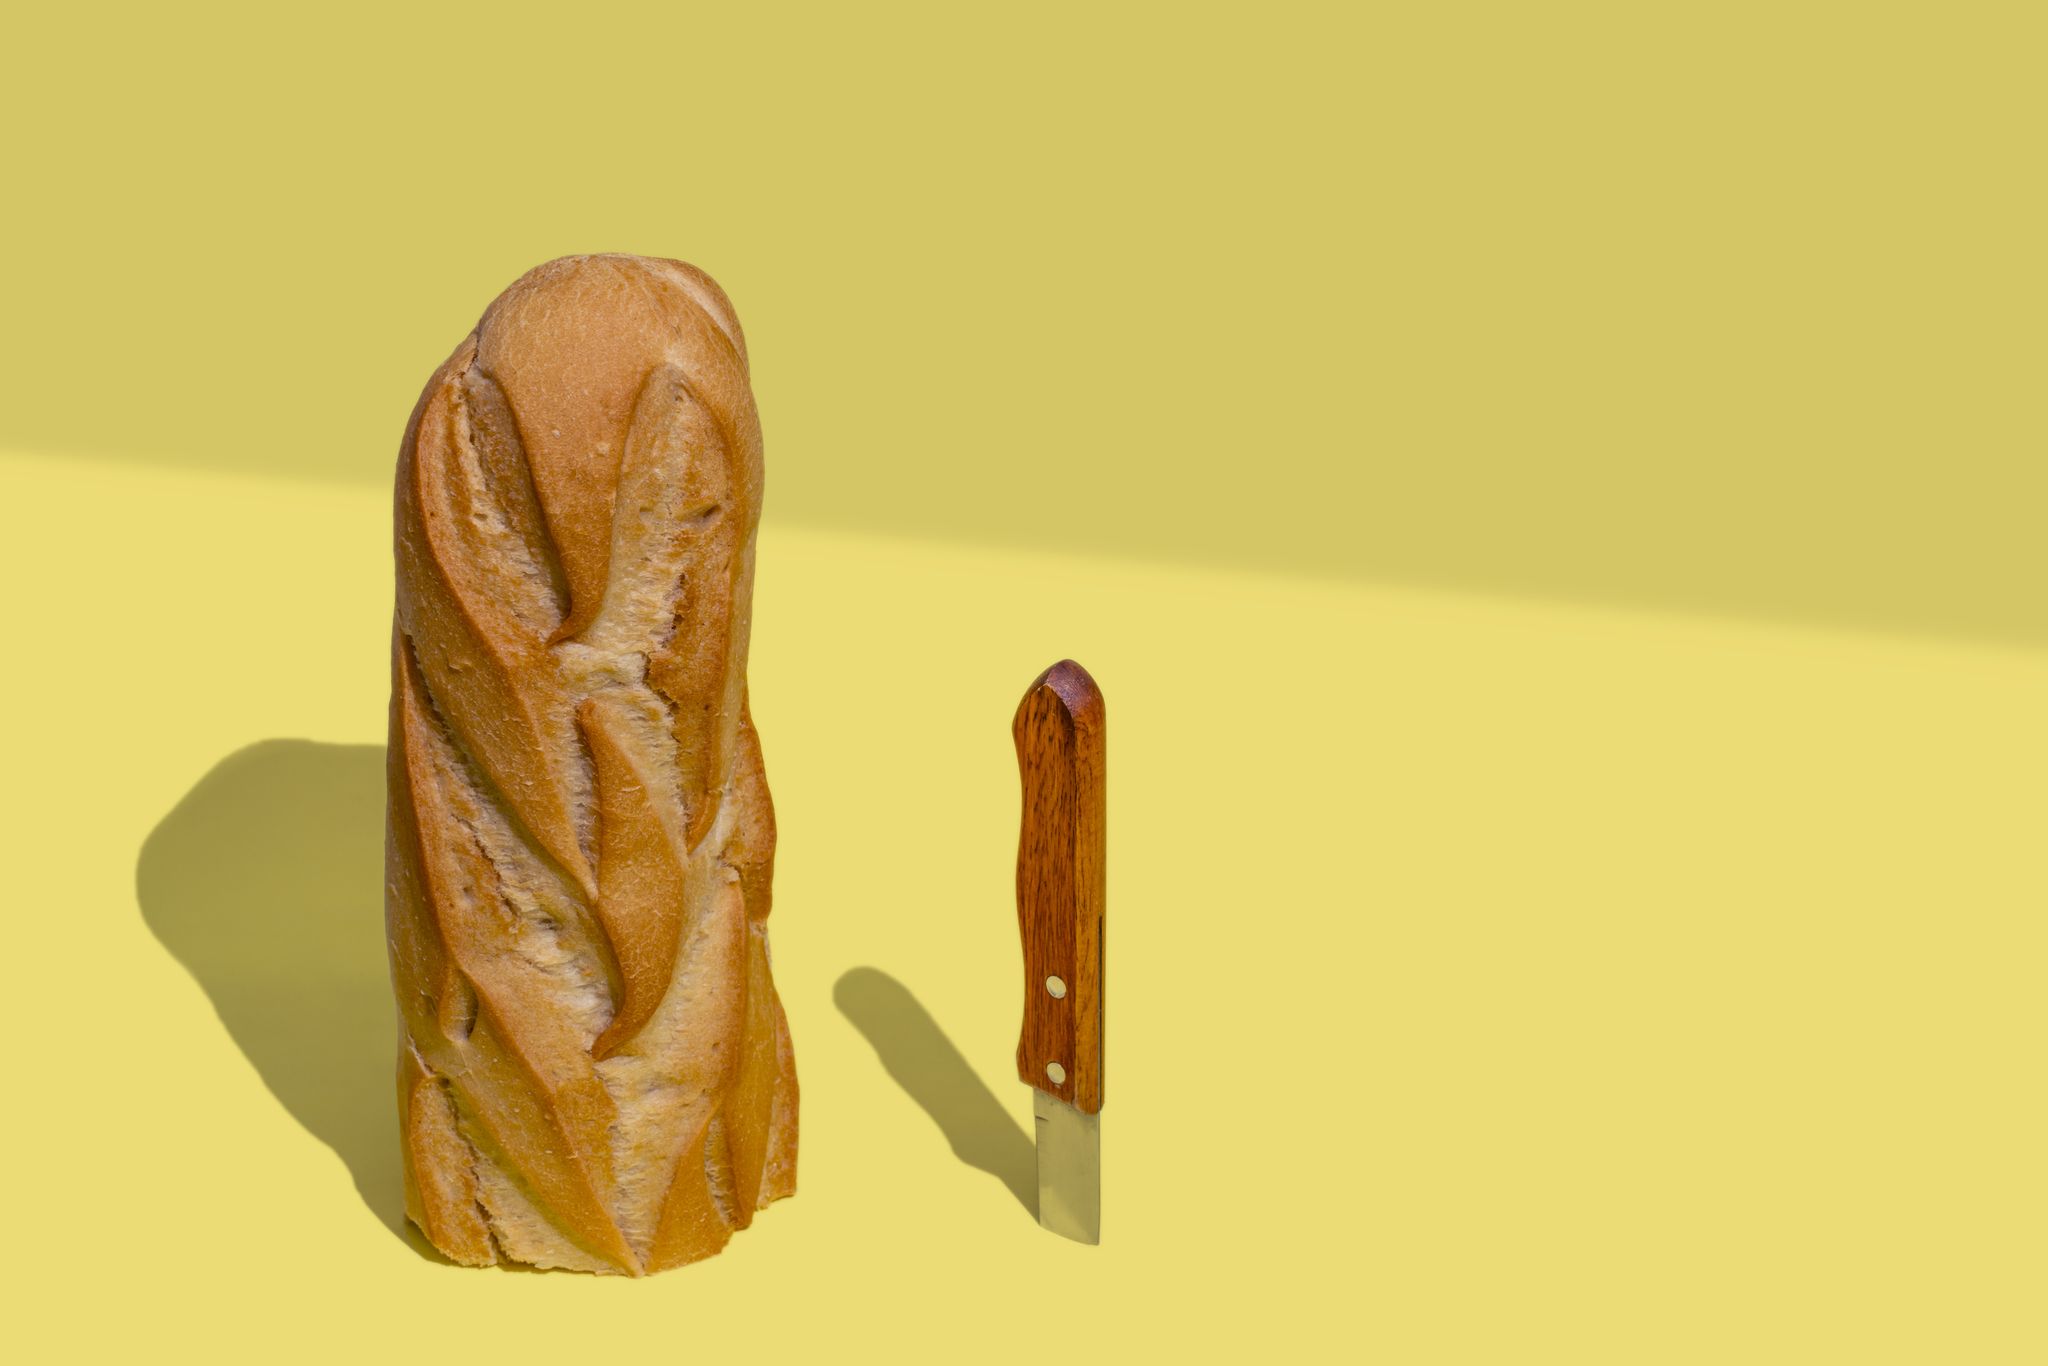 half loaf of bread and a knife on yellow background